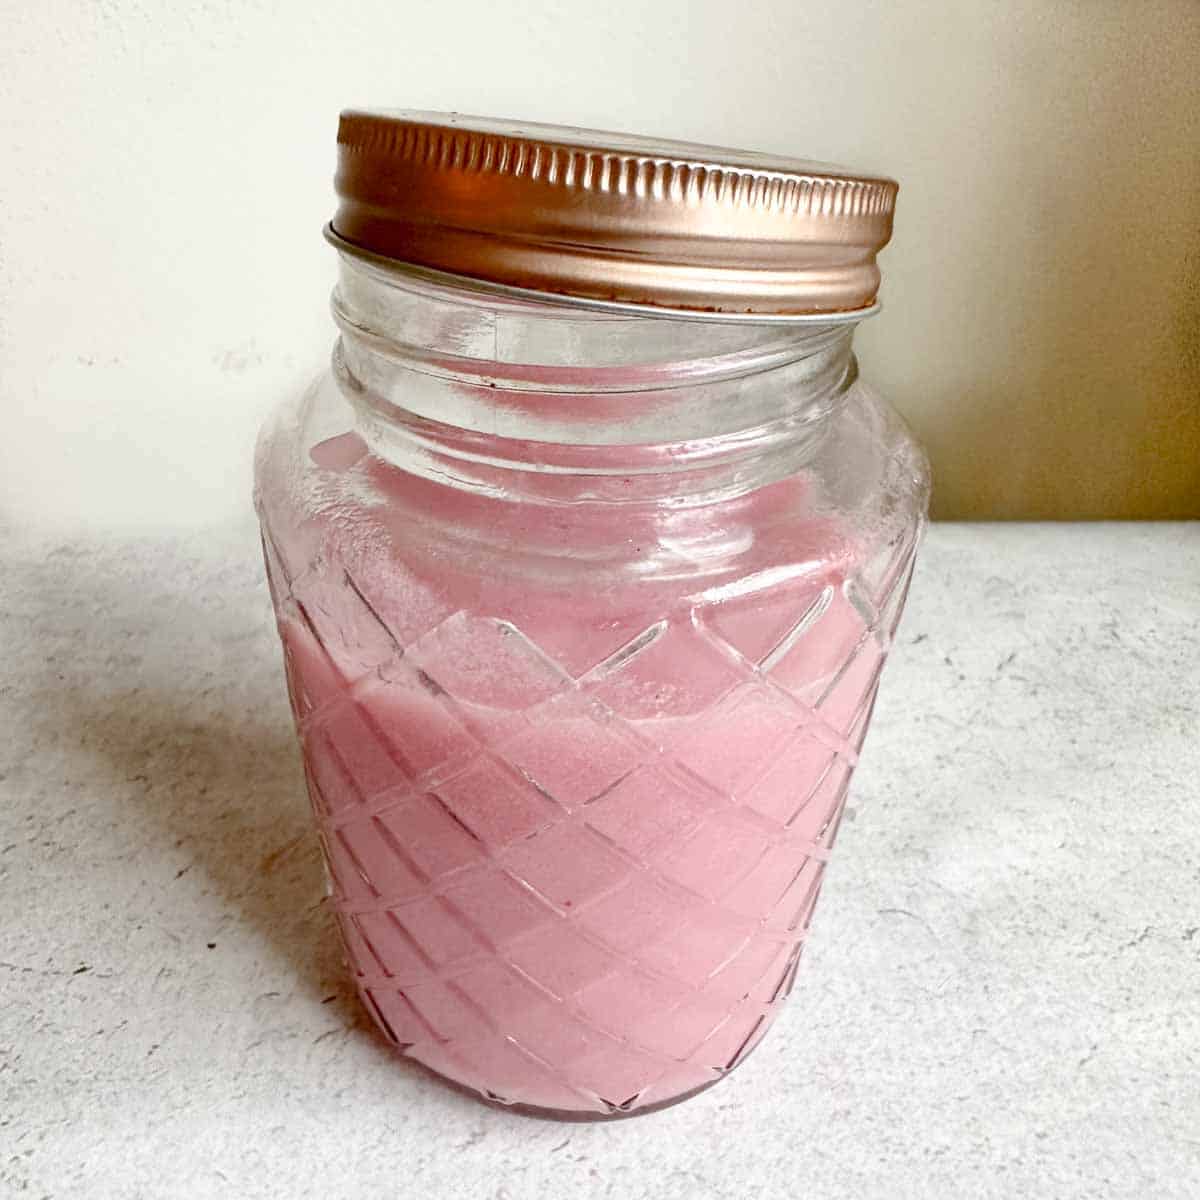 Lychee rose syrup in a glass mason jar